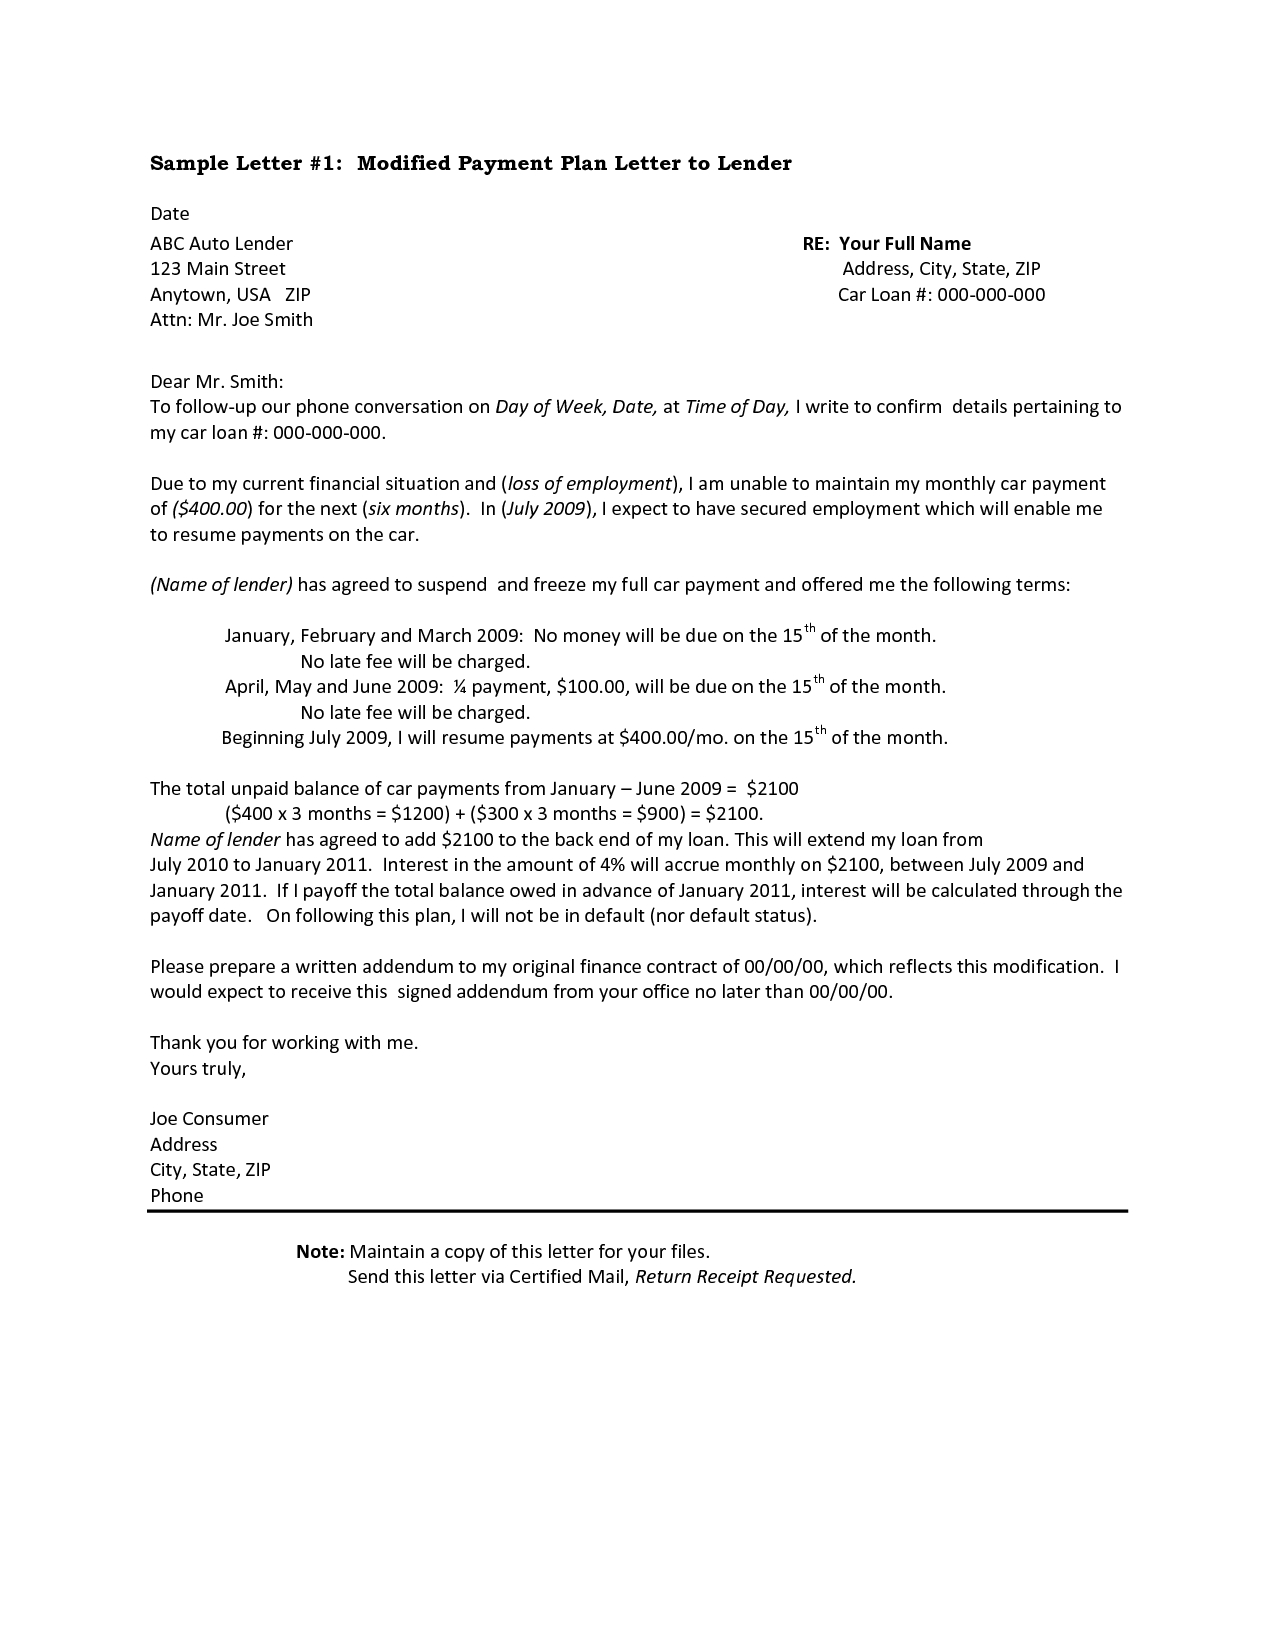 Car Repossession Dispute Letter Template - 18 Beautiful Agreement Letter for A Car